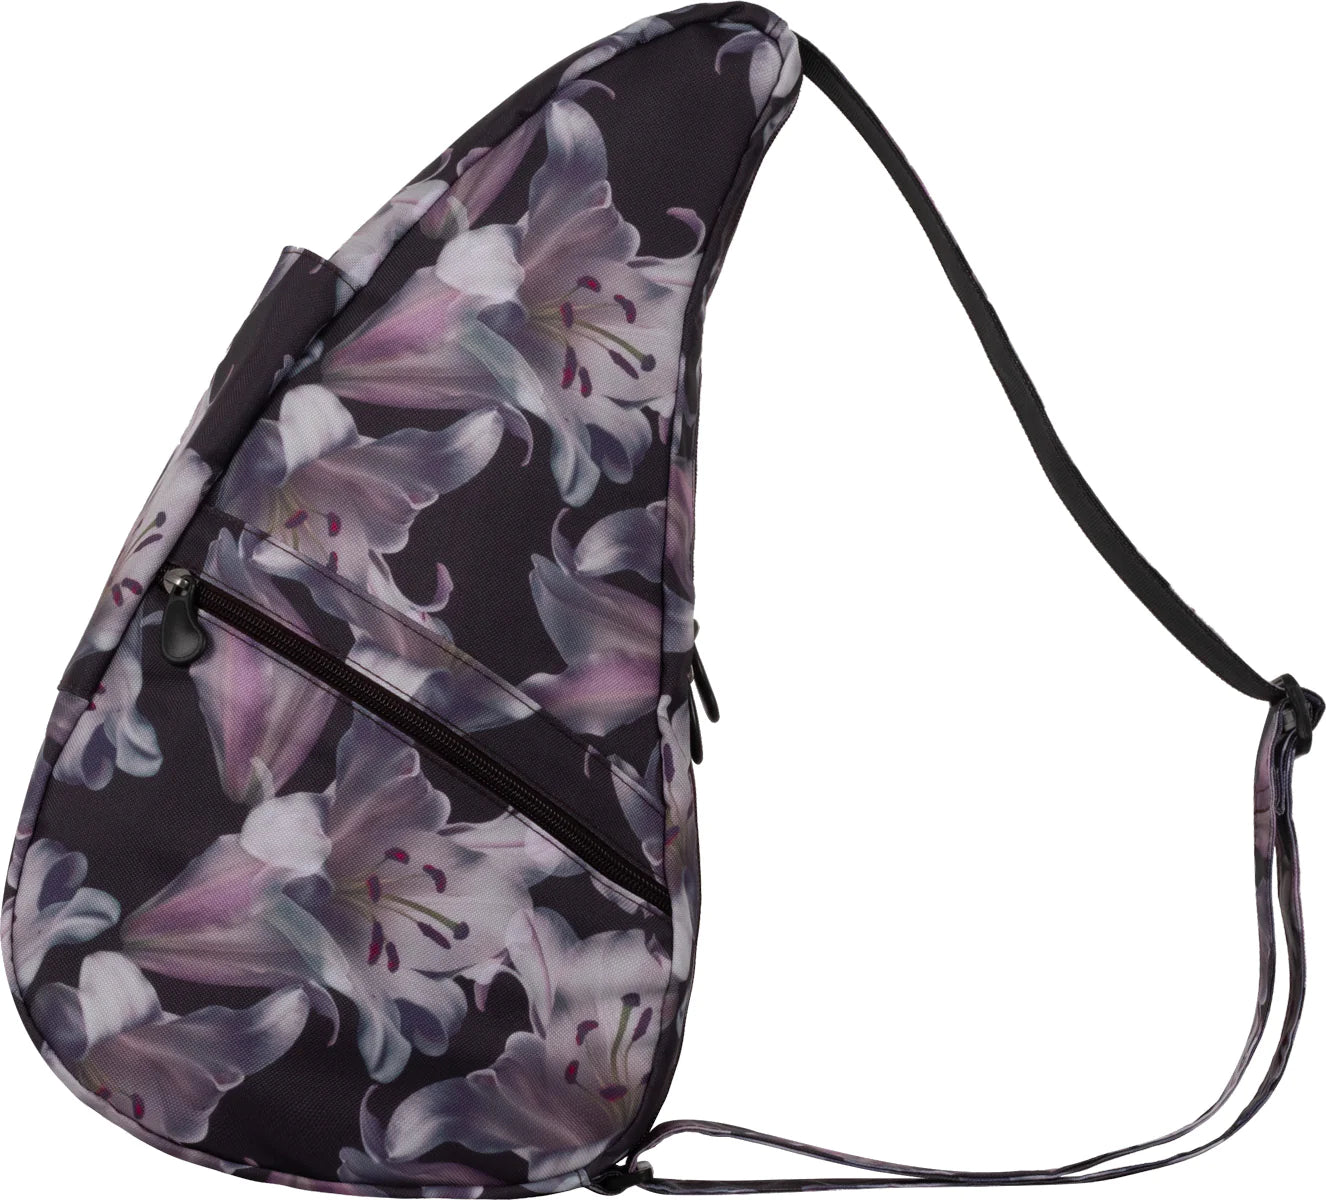 Ameribag Small Healthy Back Bag Tote Prints and Patterns Color: Lily Glow